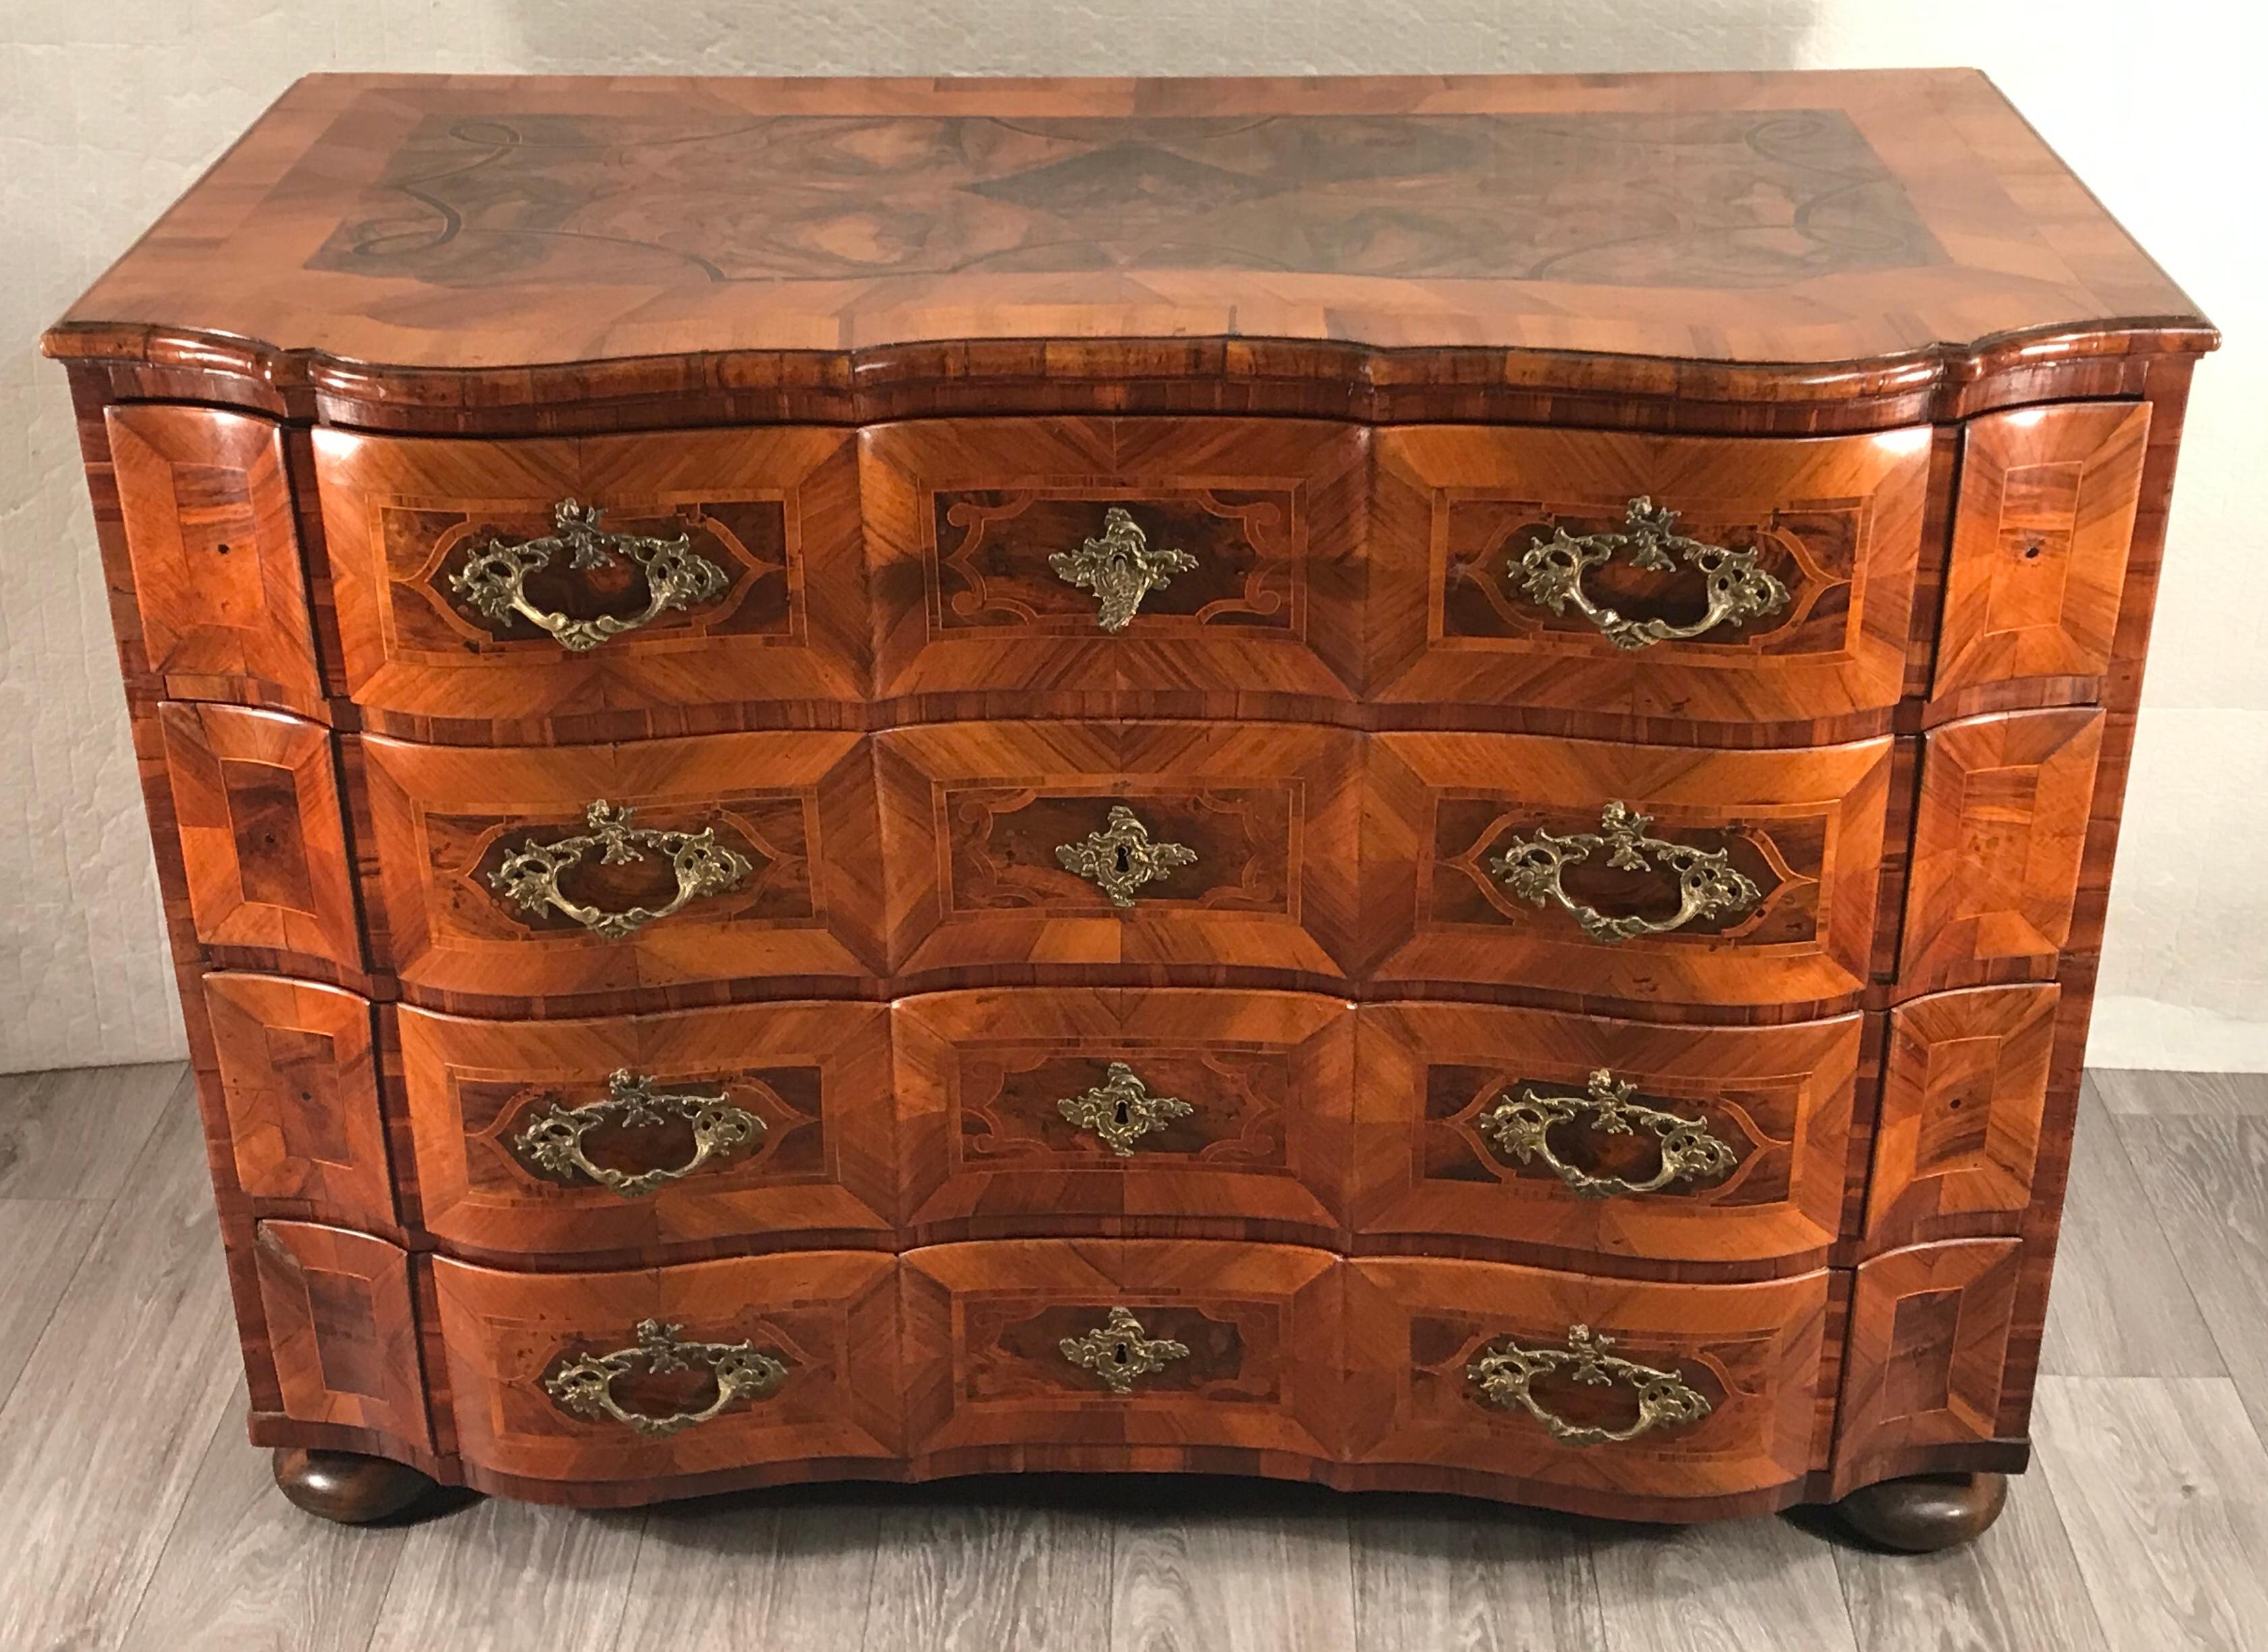 Baroque chest of drawers, Southern Germany 1750, walnut veneer with inlays in plum wood.
This unique beautiful chest of drawers has four drawers and different beautiful walnut veneer grains. The top has inlays of plum wood. Additionally, the